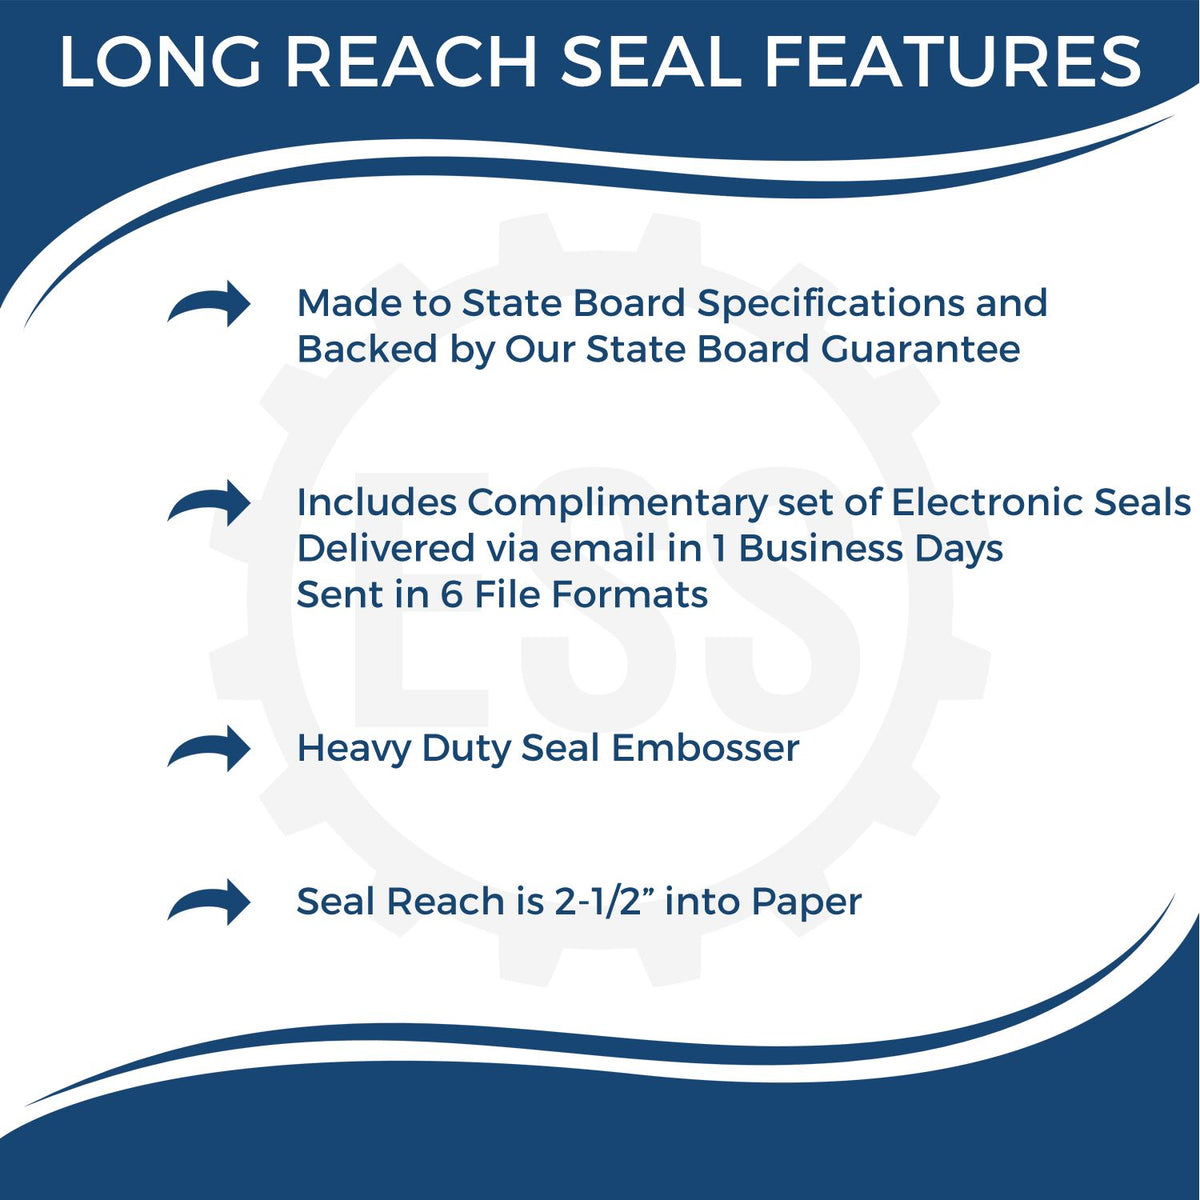 A picture of an infographic highlighting the selling points for the Long Reach South Carolina PE Seal